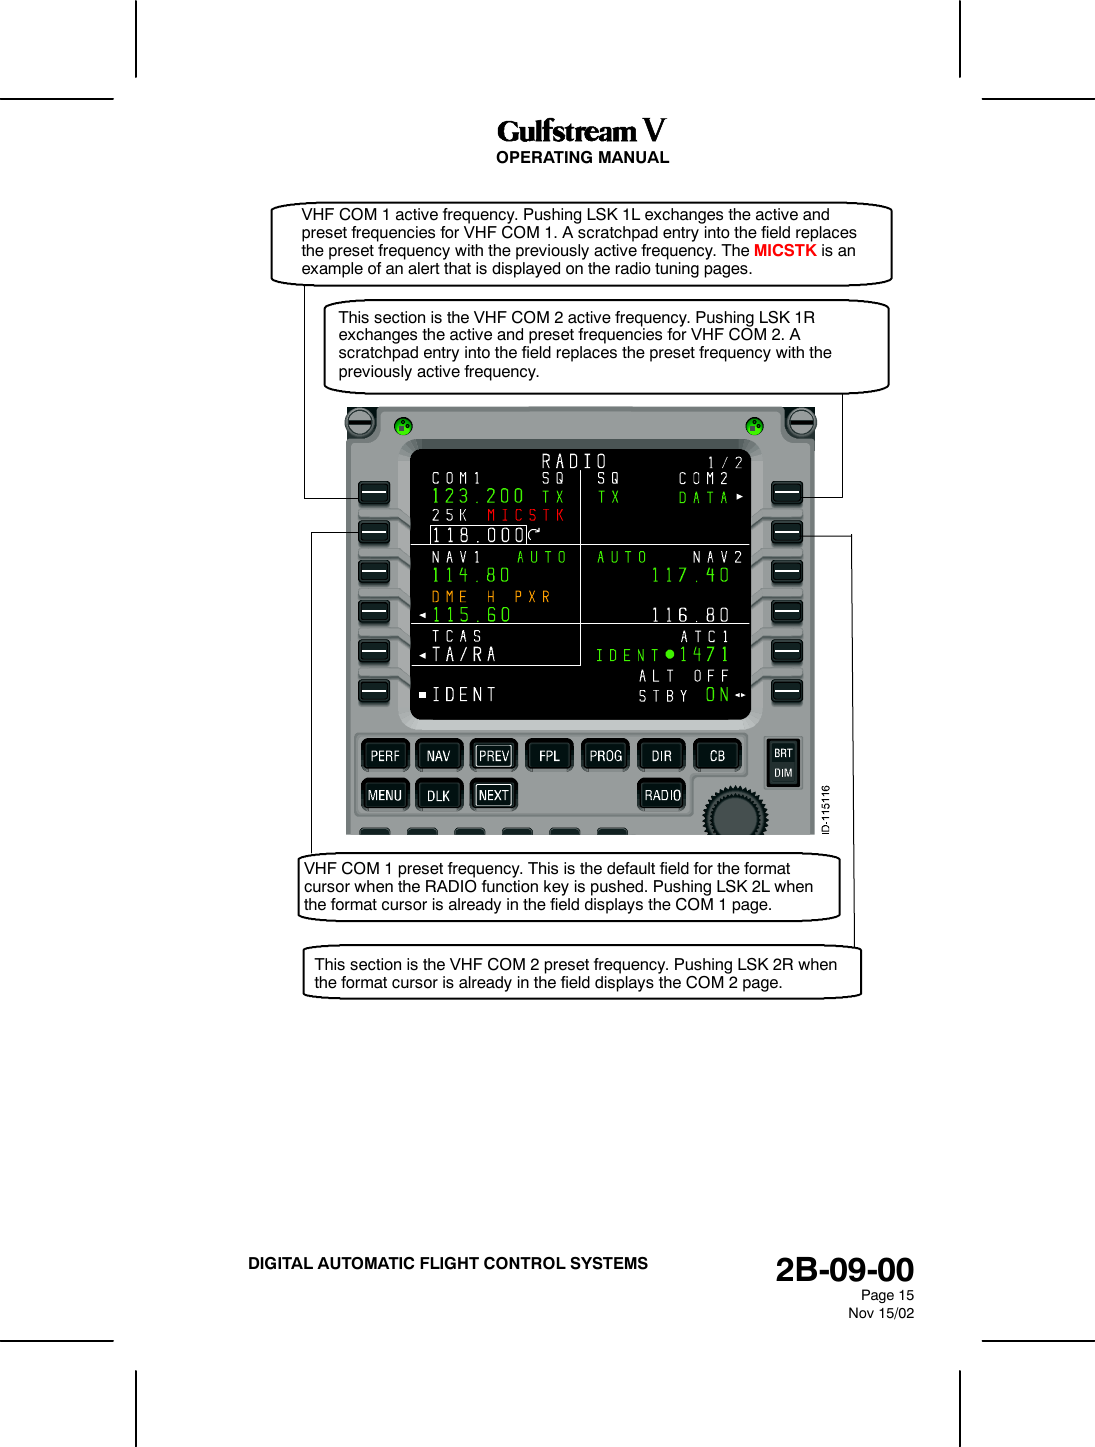 OPERATING MANUAL2B-09-00Page 15Nov 15/02DIGITAL AUTOMATIC FLIGHT CONTROL SYSTEMSVHF COM 1 active frequency. Pushing LSK 1L exchanges the active andpreset frequencies for VHF COM 1. A scratchpad entry into the field replacesthe preset frequency with the previously active frequency. The MICSTK is anexample of an alert that is displayed on the radio tuning pages.This section is the VHF COM 2 active frequency. Pushing LSK 1Rexchanges the active and preset frequencies for VHF COM 2. Ascratchpad entry into the field replaces the preset frequency with thepreviously active frequency.VHF COM 1 preset frequency. This is the default field for the formatcursor when the RADIO function key is pushed. Pushing LSK 2L whenthe format cursor is already in the field displays the COM 1 page.This section is the VHF COM 2 preset frequency. Pushing LSK 2R whenthe format cursor is already in the field displays the COM 2 page.